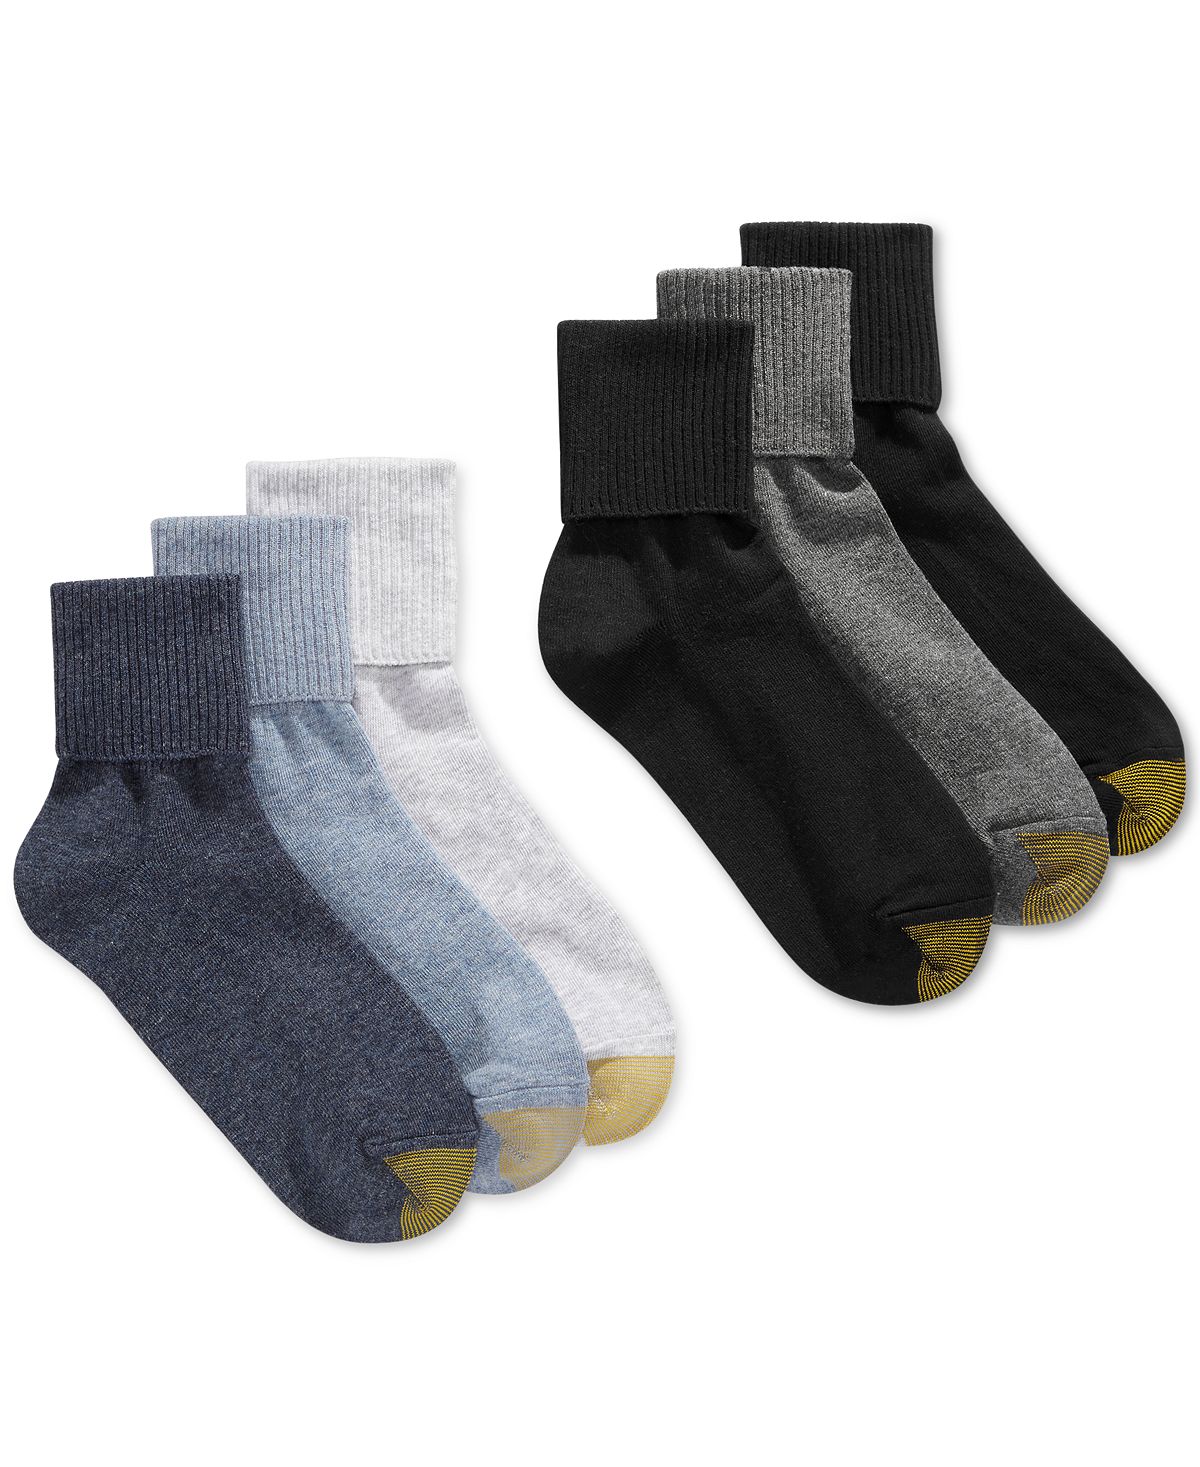 Gold Toe Wo Turn Cuff 6 Pack Socks Also Available In Extended Sizes Blue Multi Pack